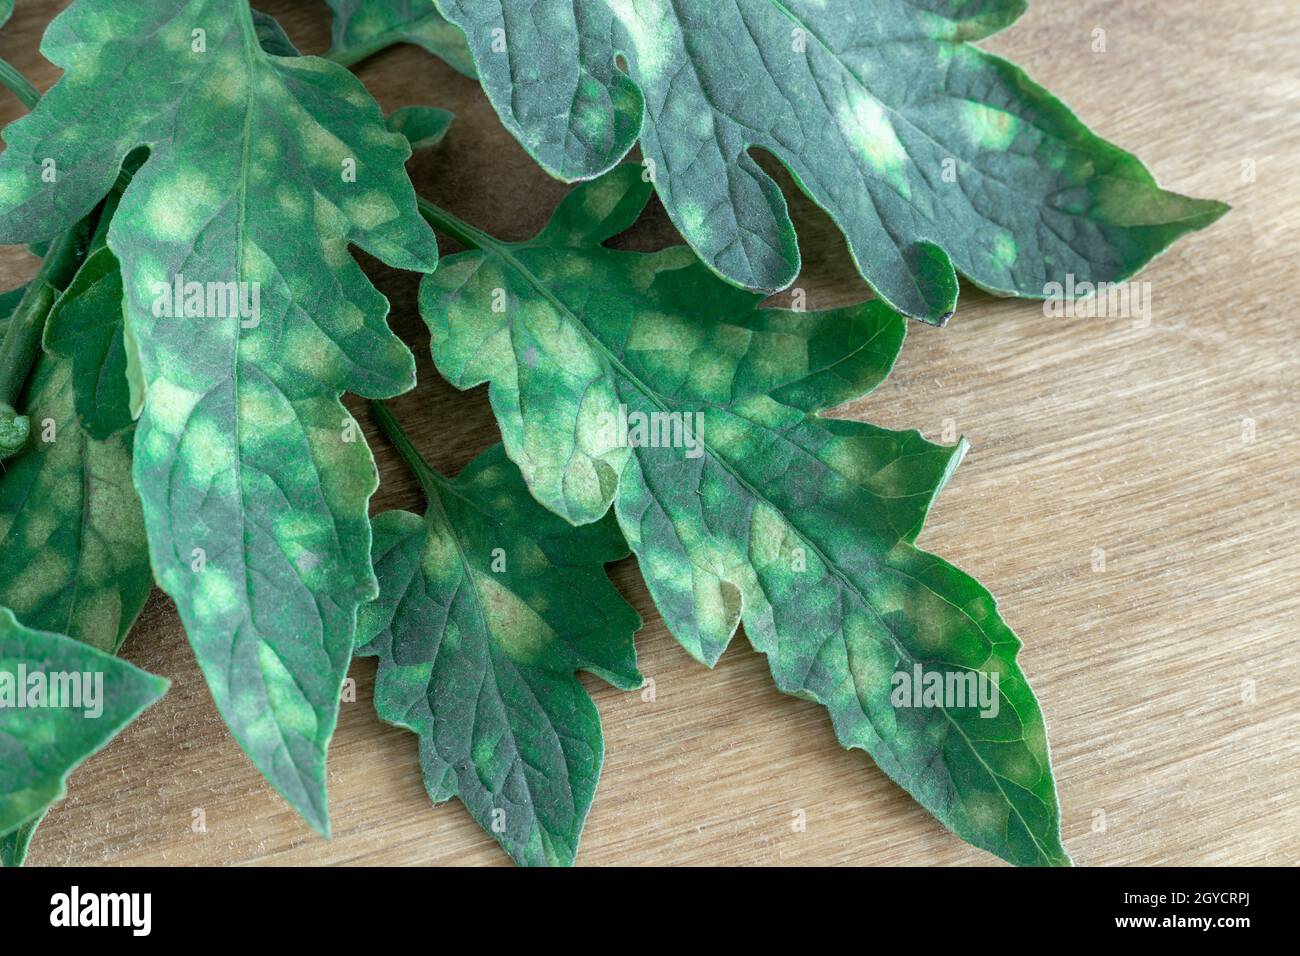 Plant diseases: tomato leaves are affected by cladosporiosis with pale yellow spots on the leaves. Fungal damage to tomatoes and a decrease in yield. Stock Photo